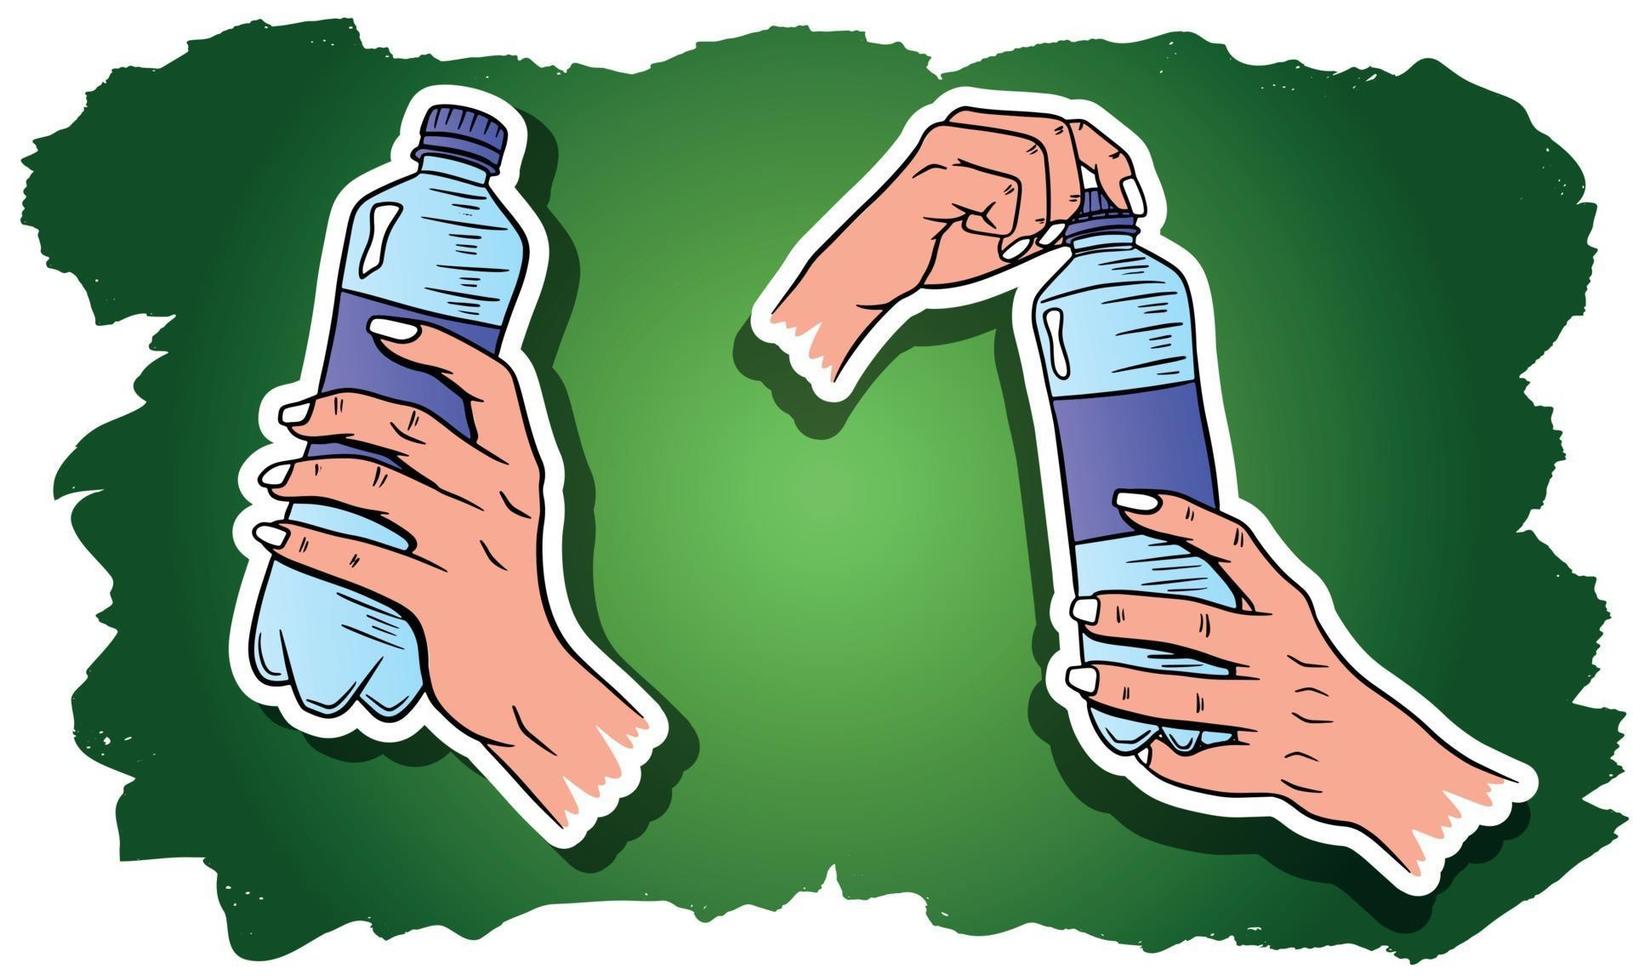 World Water Day. Water in a plastic bottle. Water bottle in hand. Set of vector illustrations.